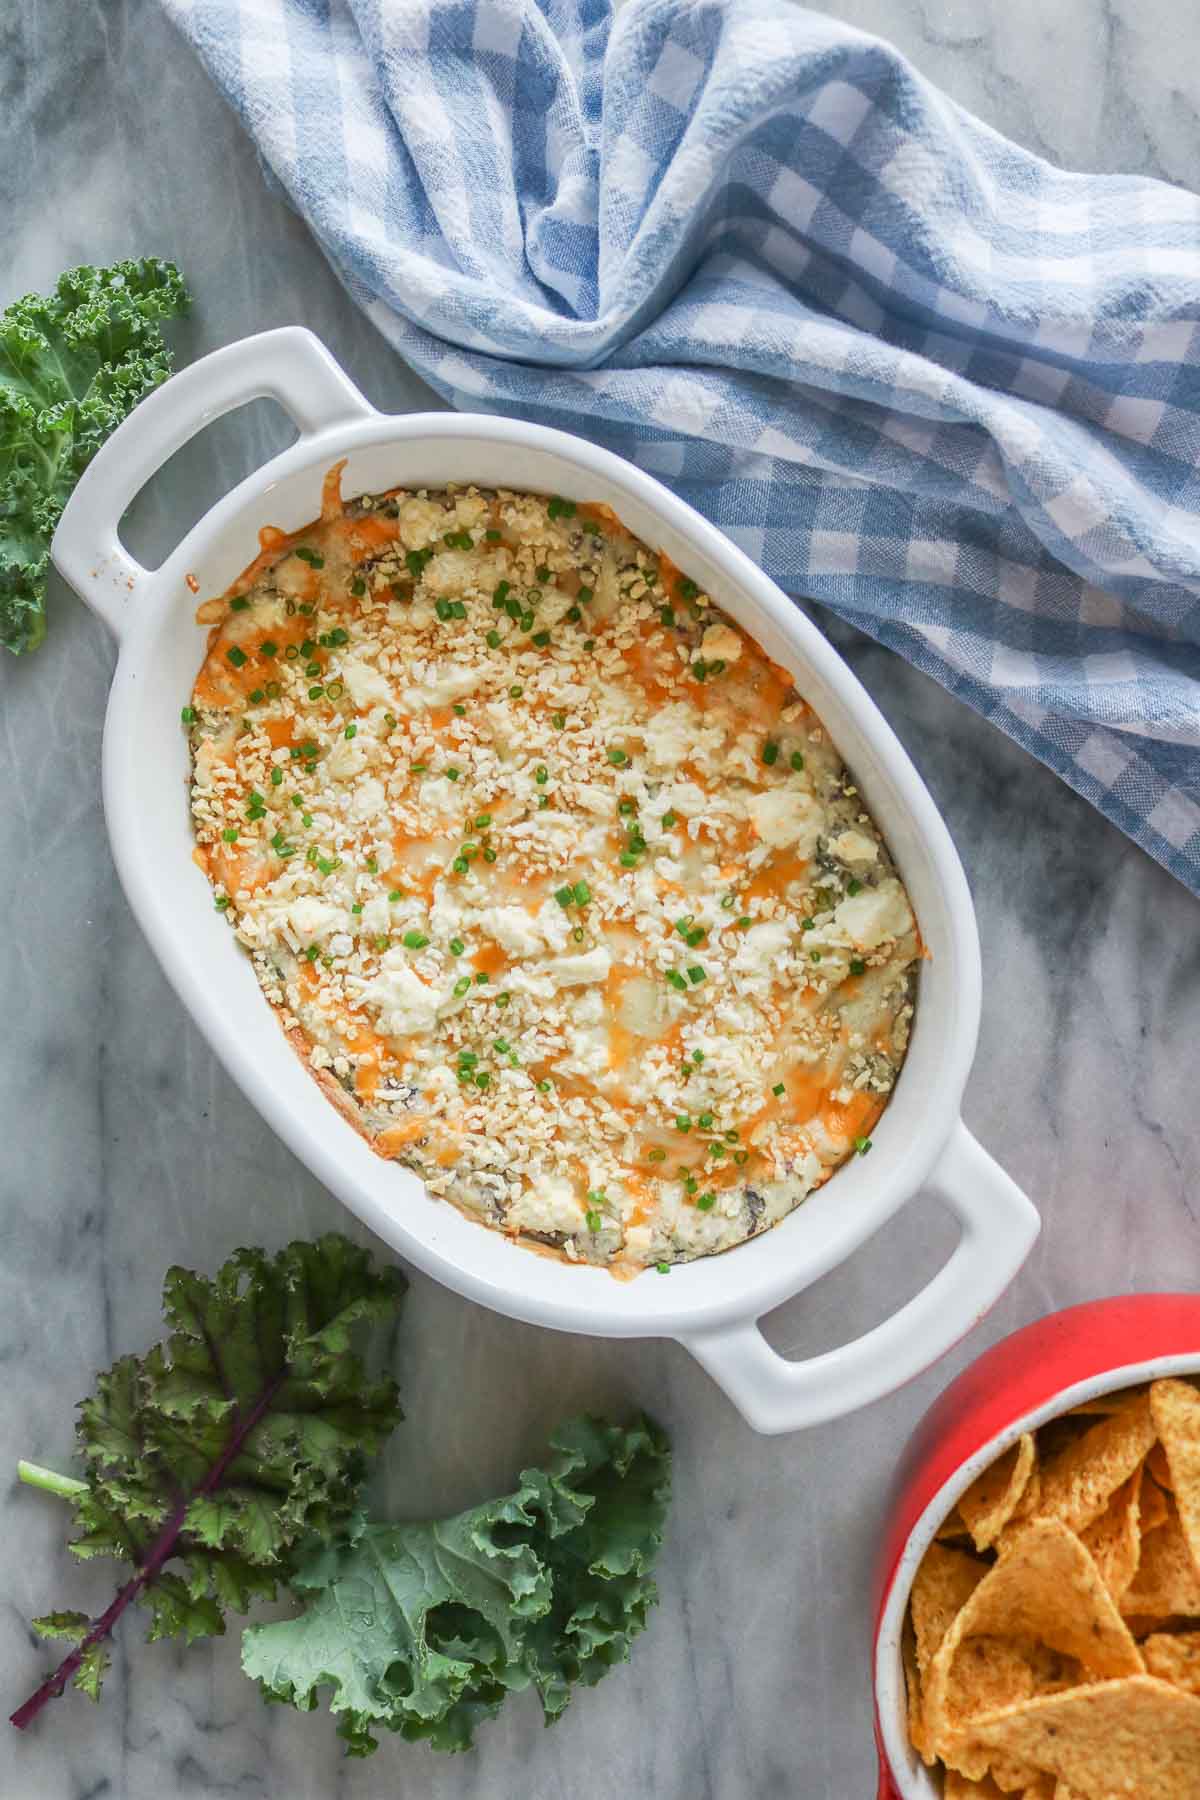 Cheesy kale dip in a baking dish alongside a bowl of tortilla chips and fresh kale.